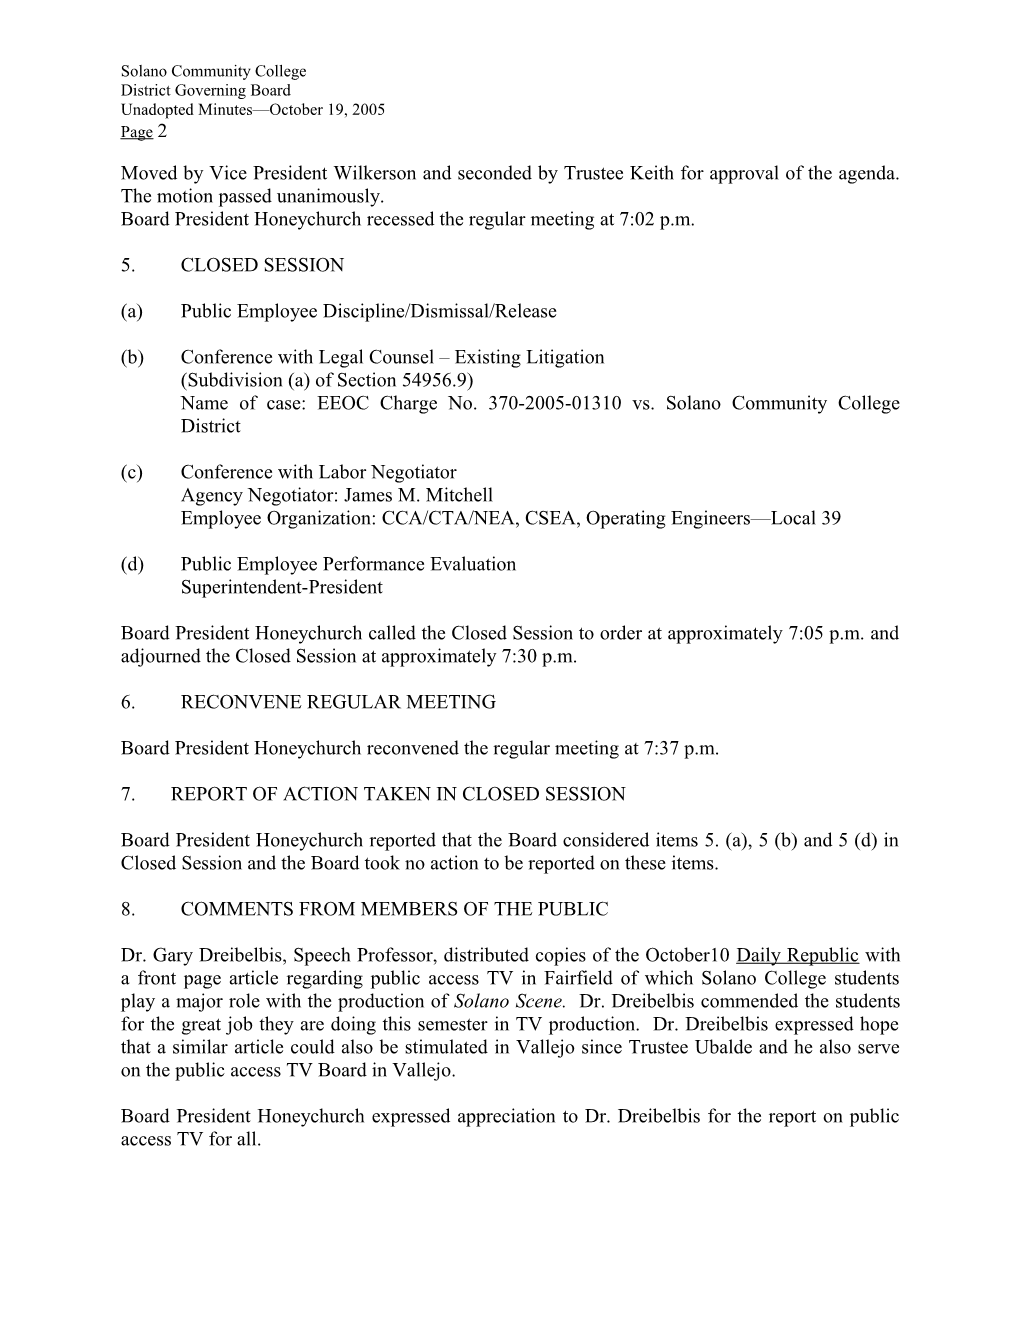 SCCD - Board Meeting Minutes 10/19/05